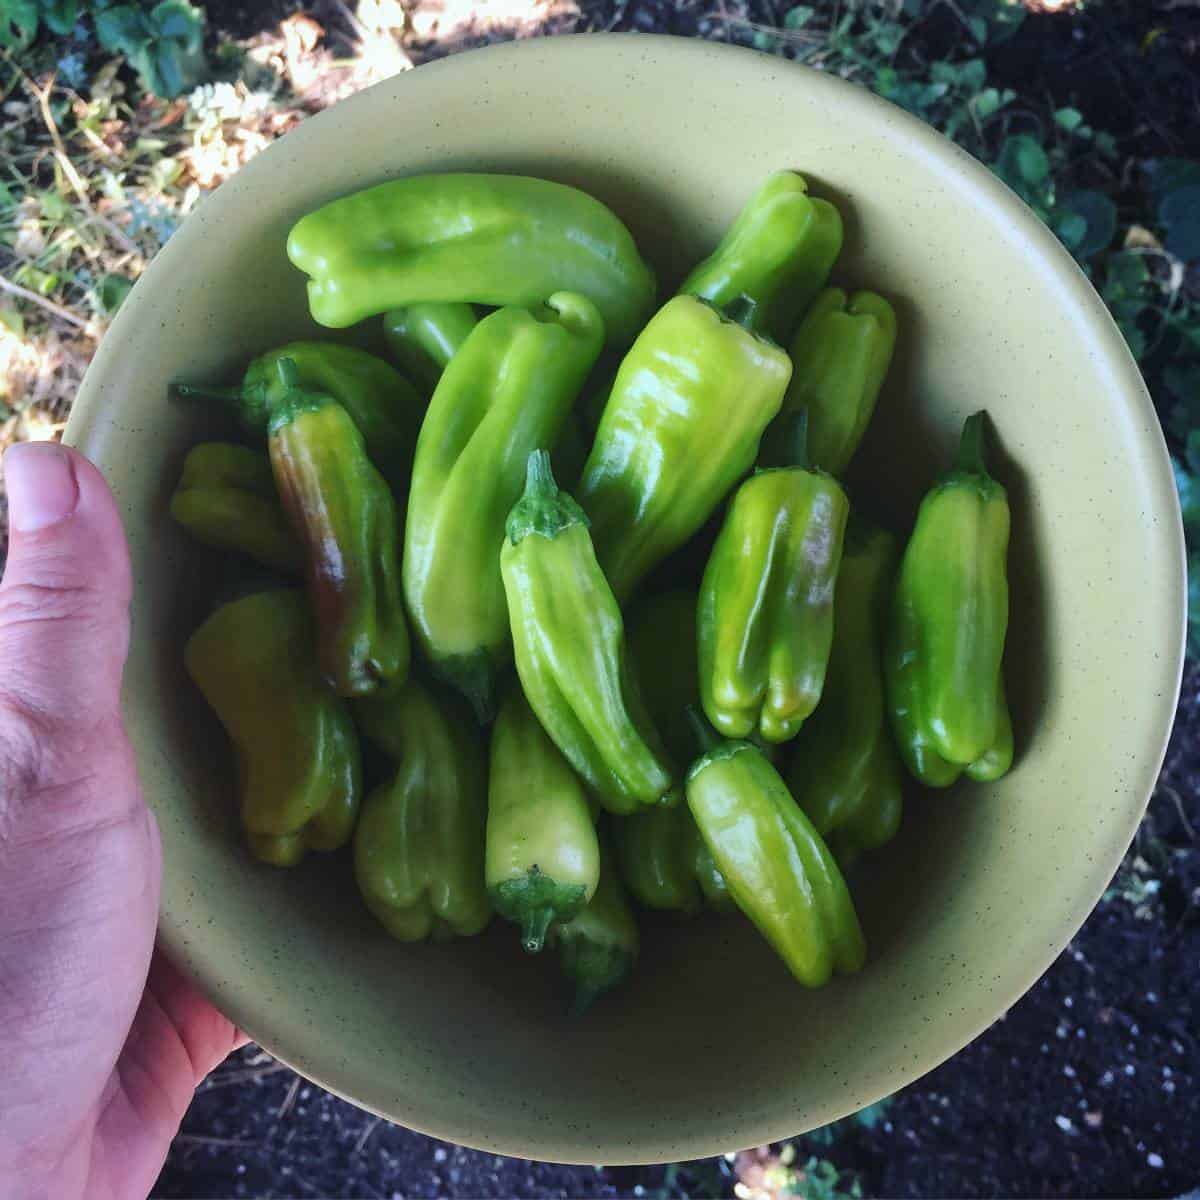 a bowl of pepperoncini peppers